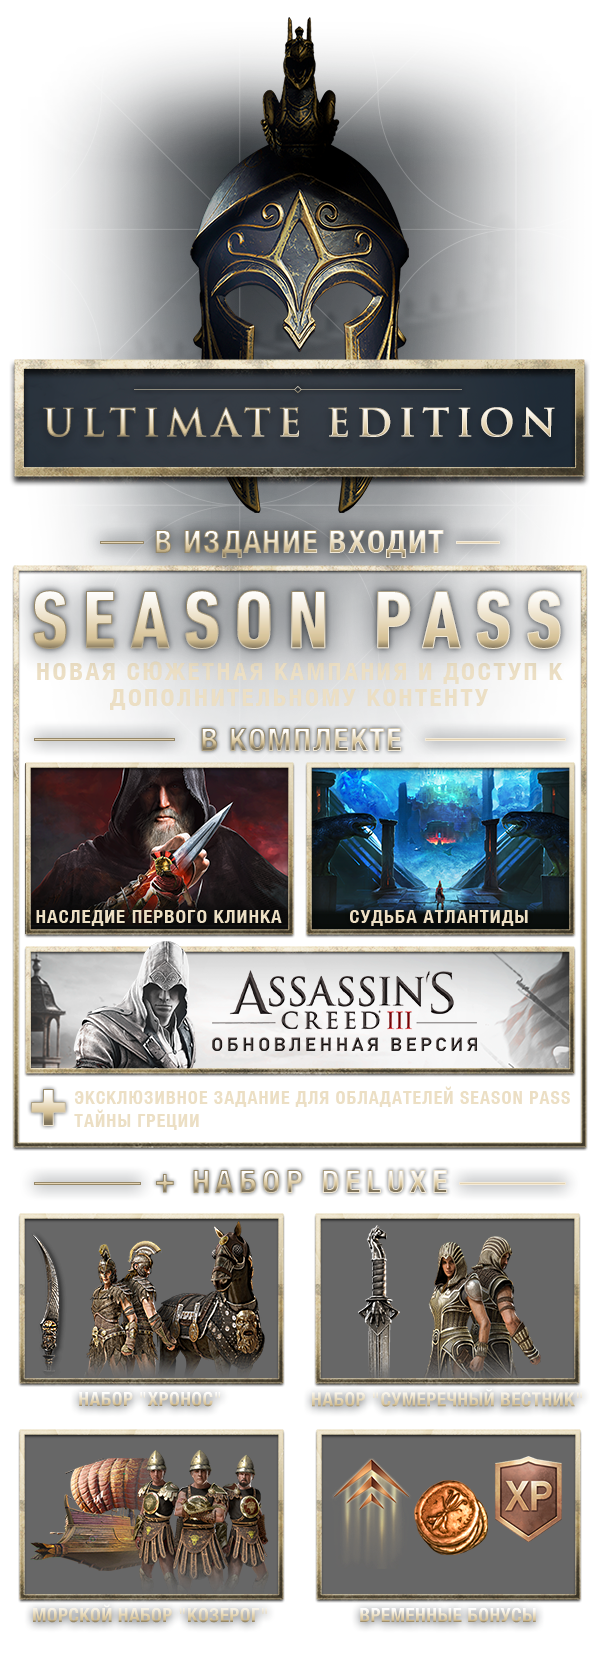 ✅ Assassin´s Creed Odyssey – ULTIMATE EDITION XBOX Key